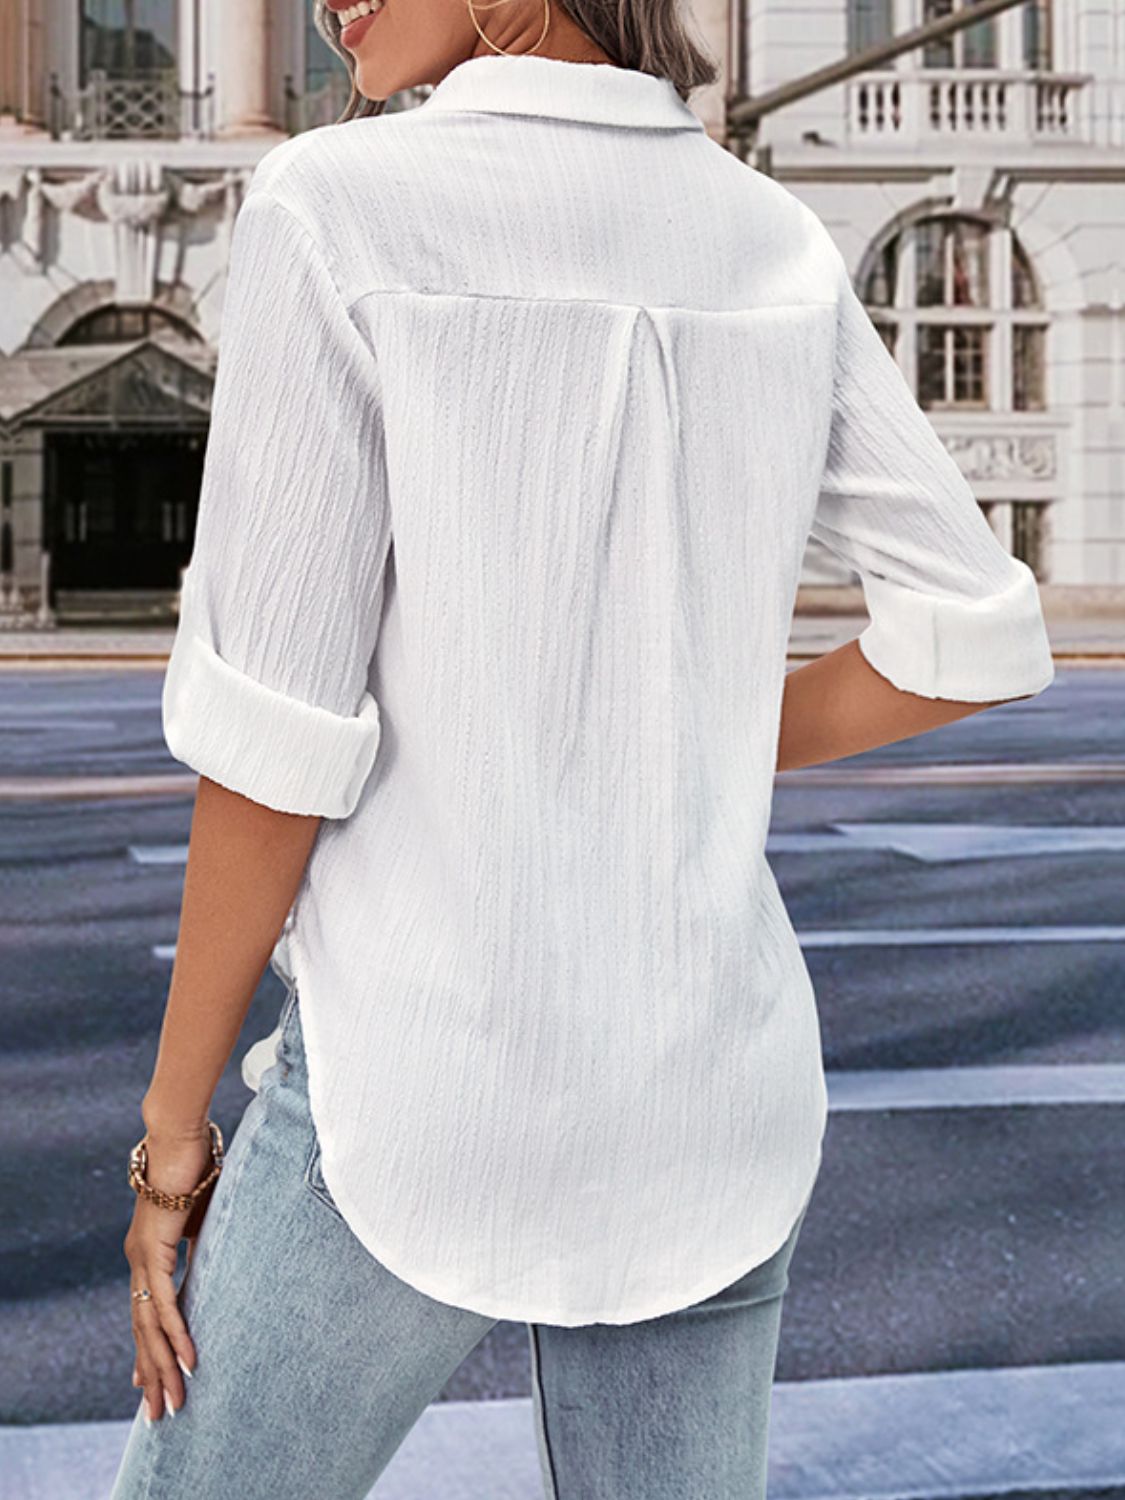 Collared Neck Half Sleeve Twisted Shirt free shipping -Oh Em Gee Boutique